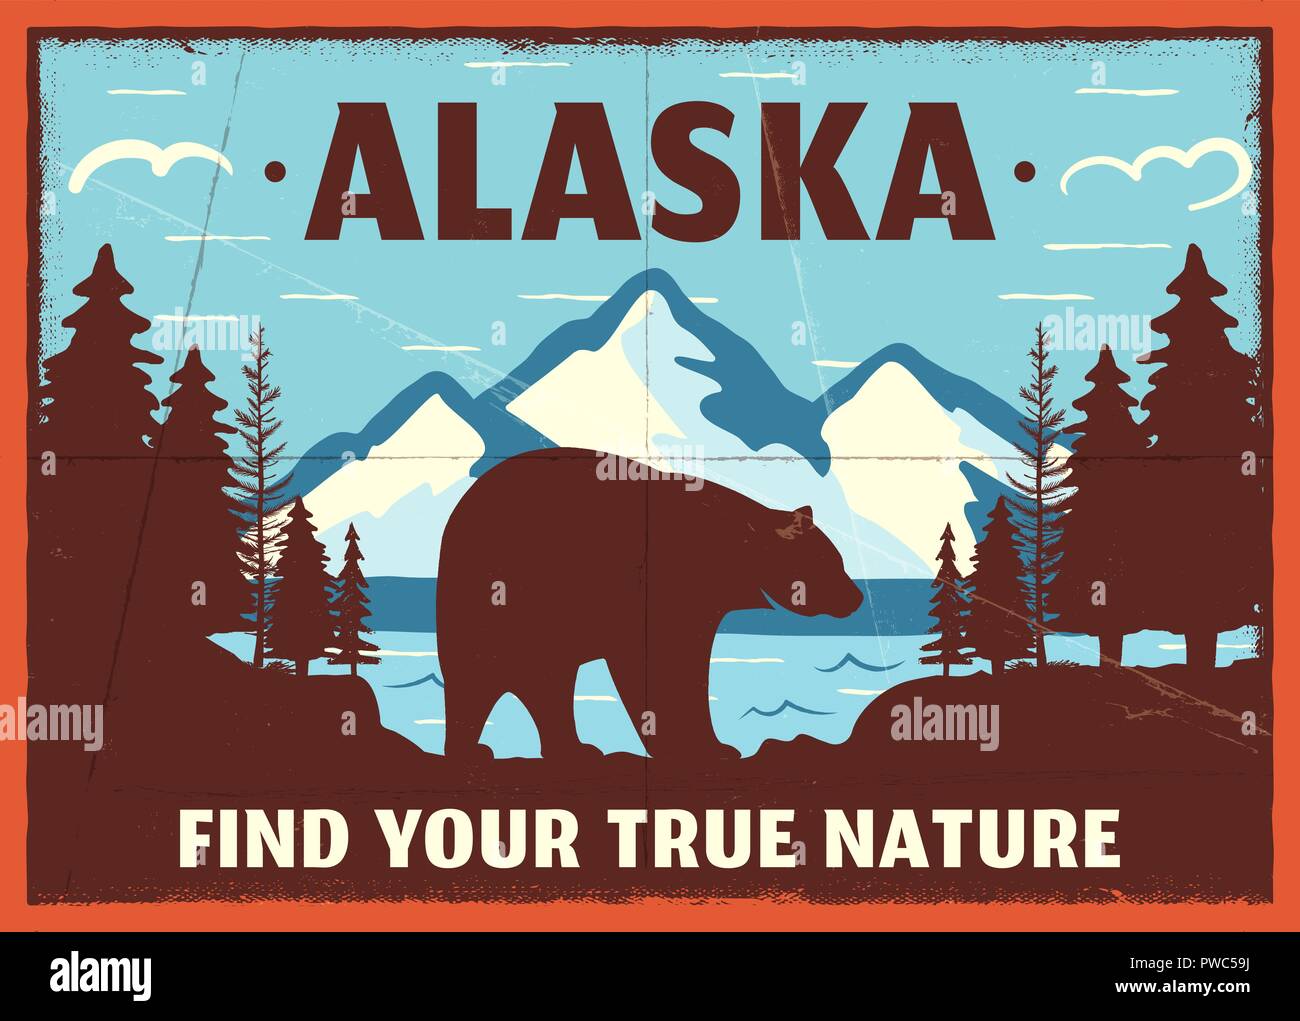 Alaska poster design. Mountain adventure patch. American travel logo. Cute retro style label, brochure. Find your true nature custom quote. Bear walking through the forest. Stock vector emblem Stock Vector